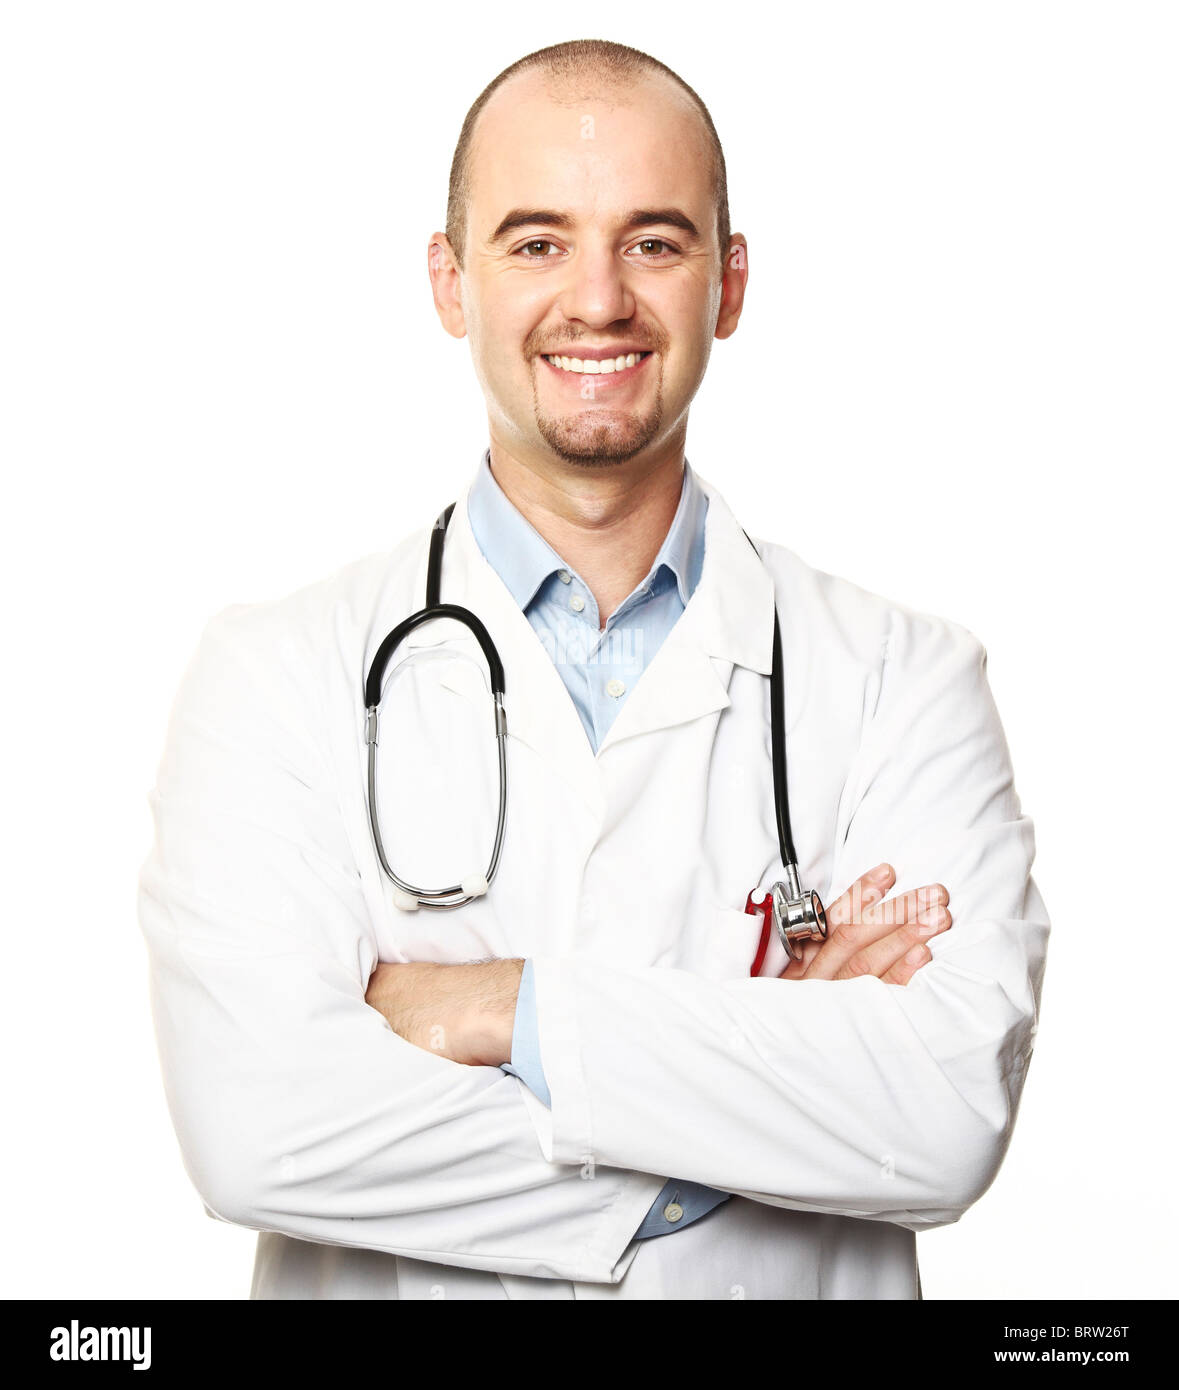 smiling caucasian doctor isolated on white background Stock Photo